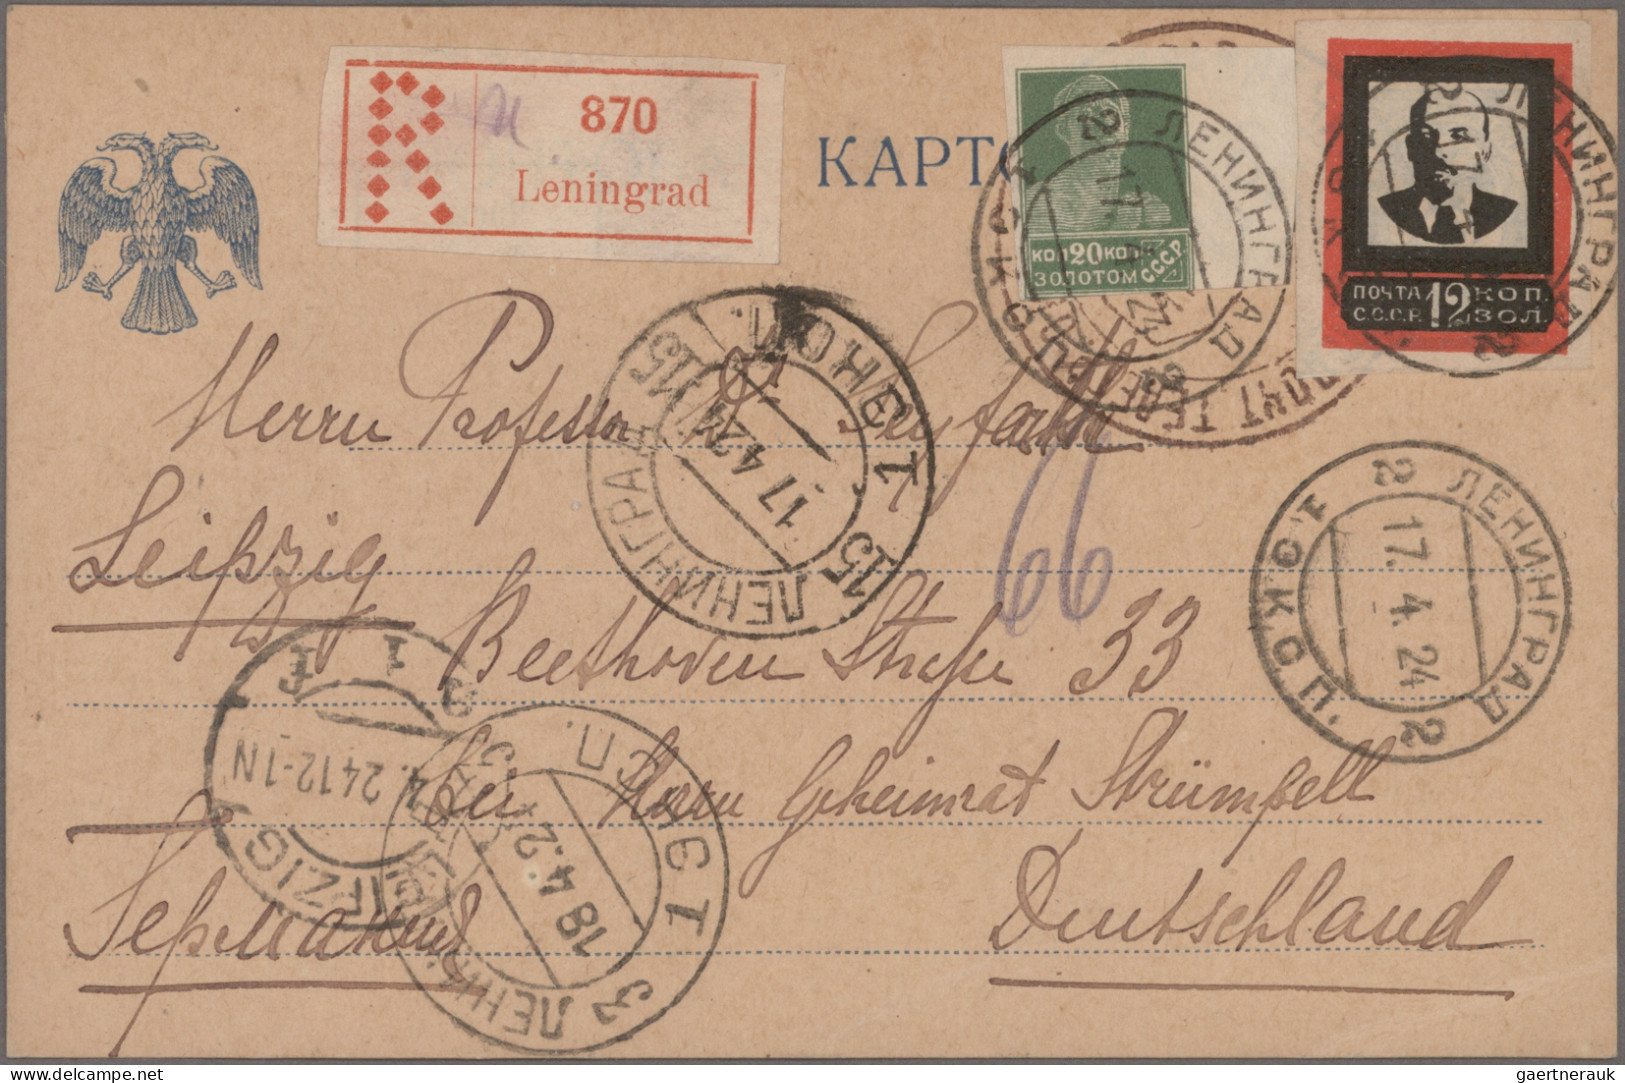 Russia: 1922/1924, INFLATION/TRANSITION PERIOD, extraordinary collection of appr